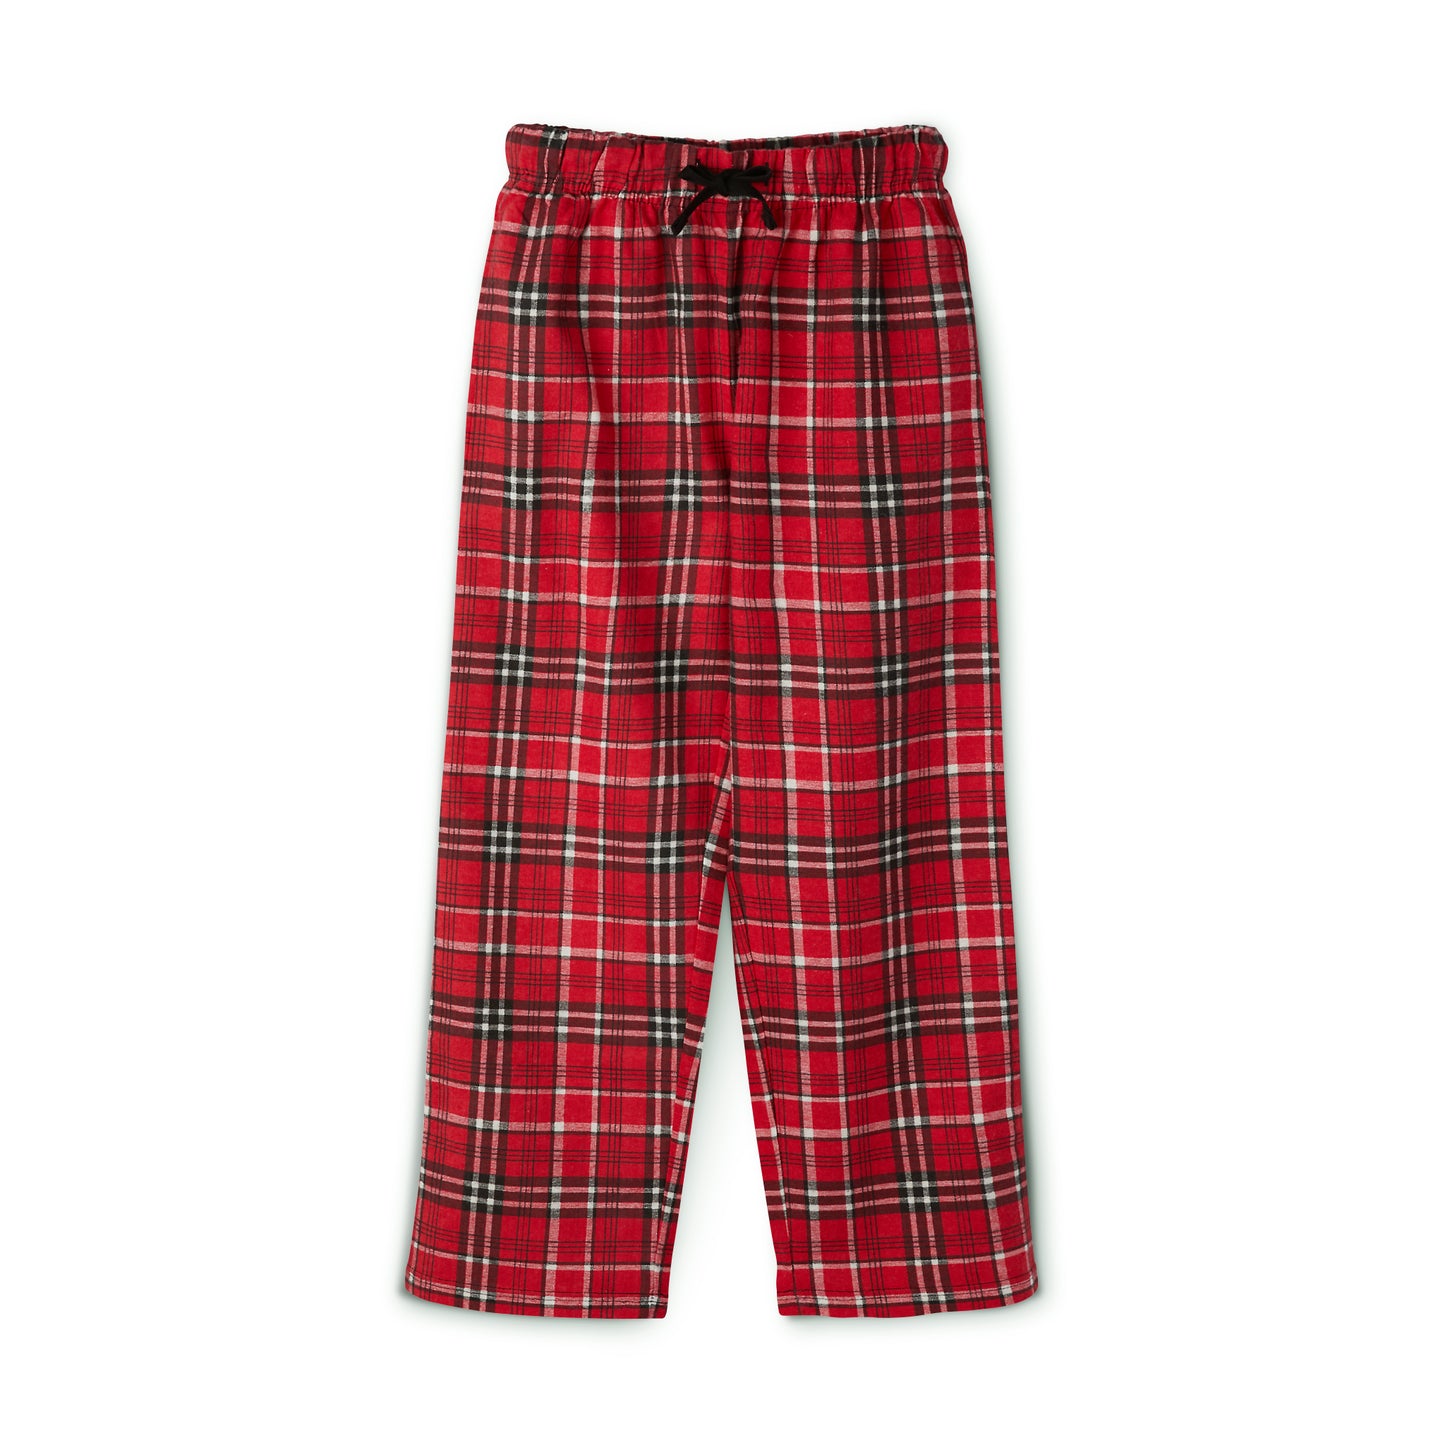 These Printify Kids Holiday Pajama Set: Unisex; 4 sizes; Short-sleeves are made from 100% cotton and feature a festive red and black plaid design on a white background. Made in America.